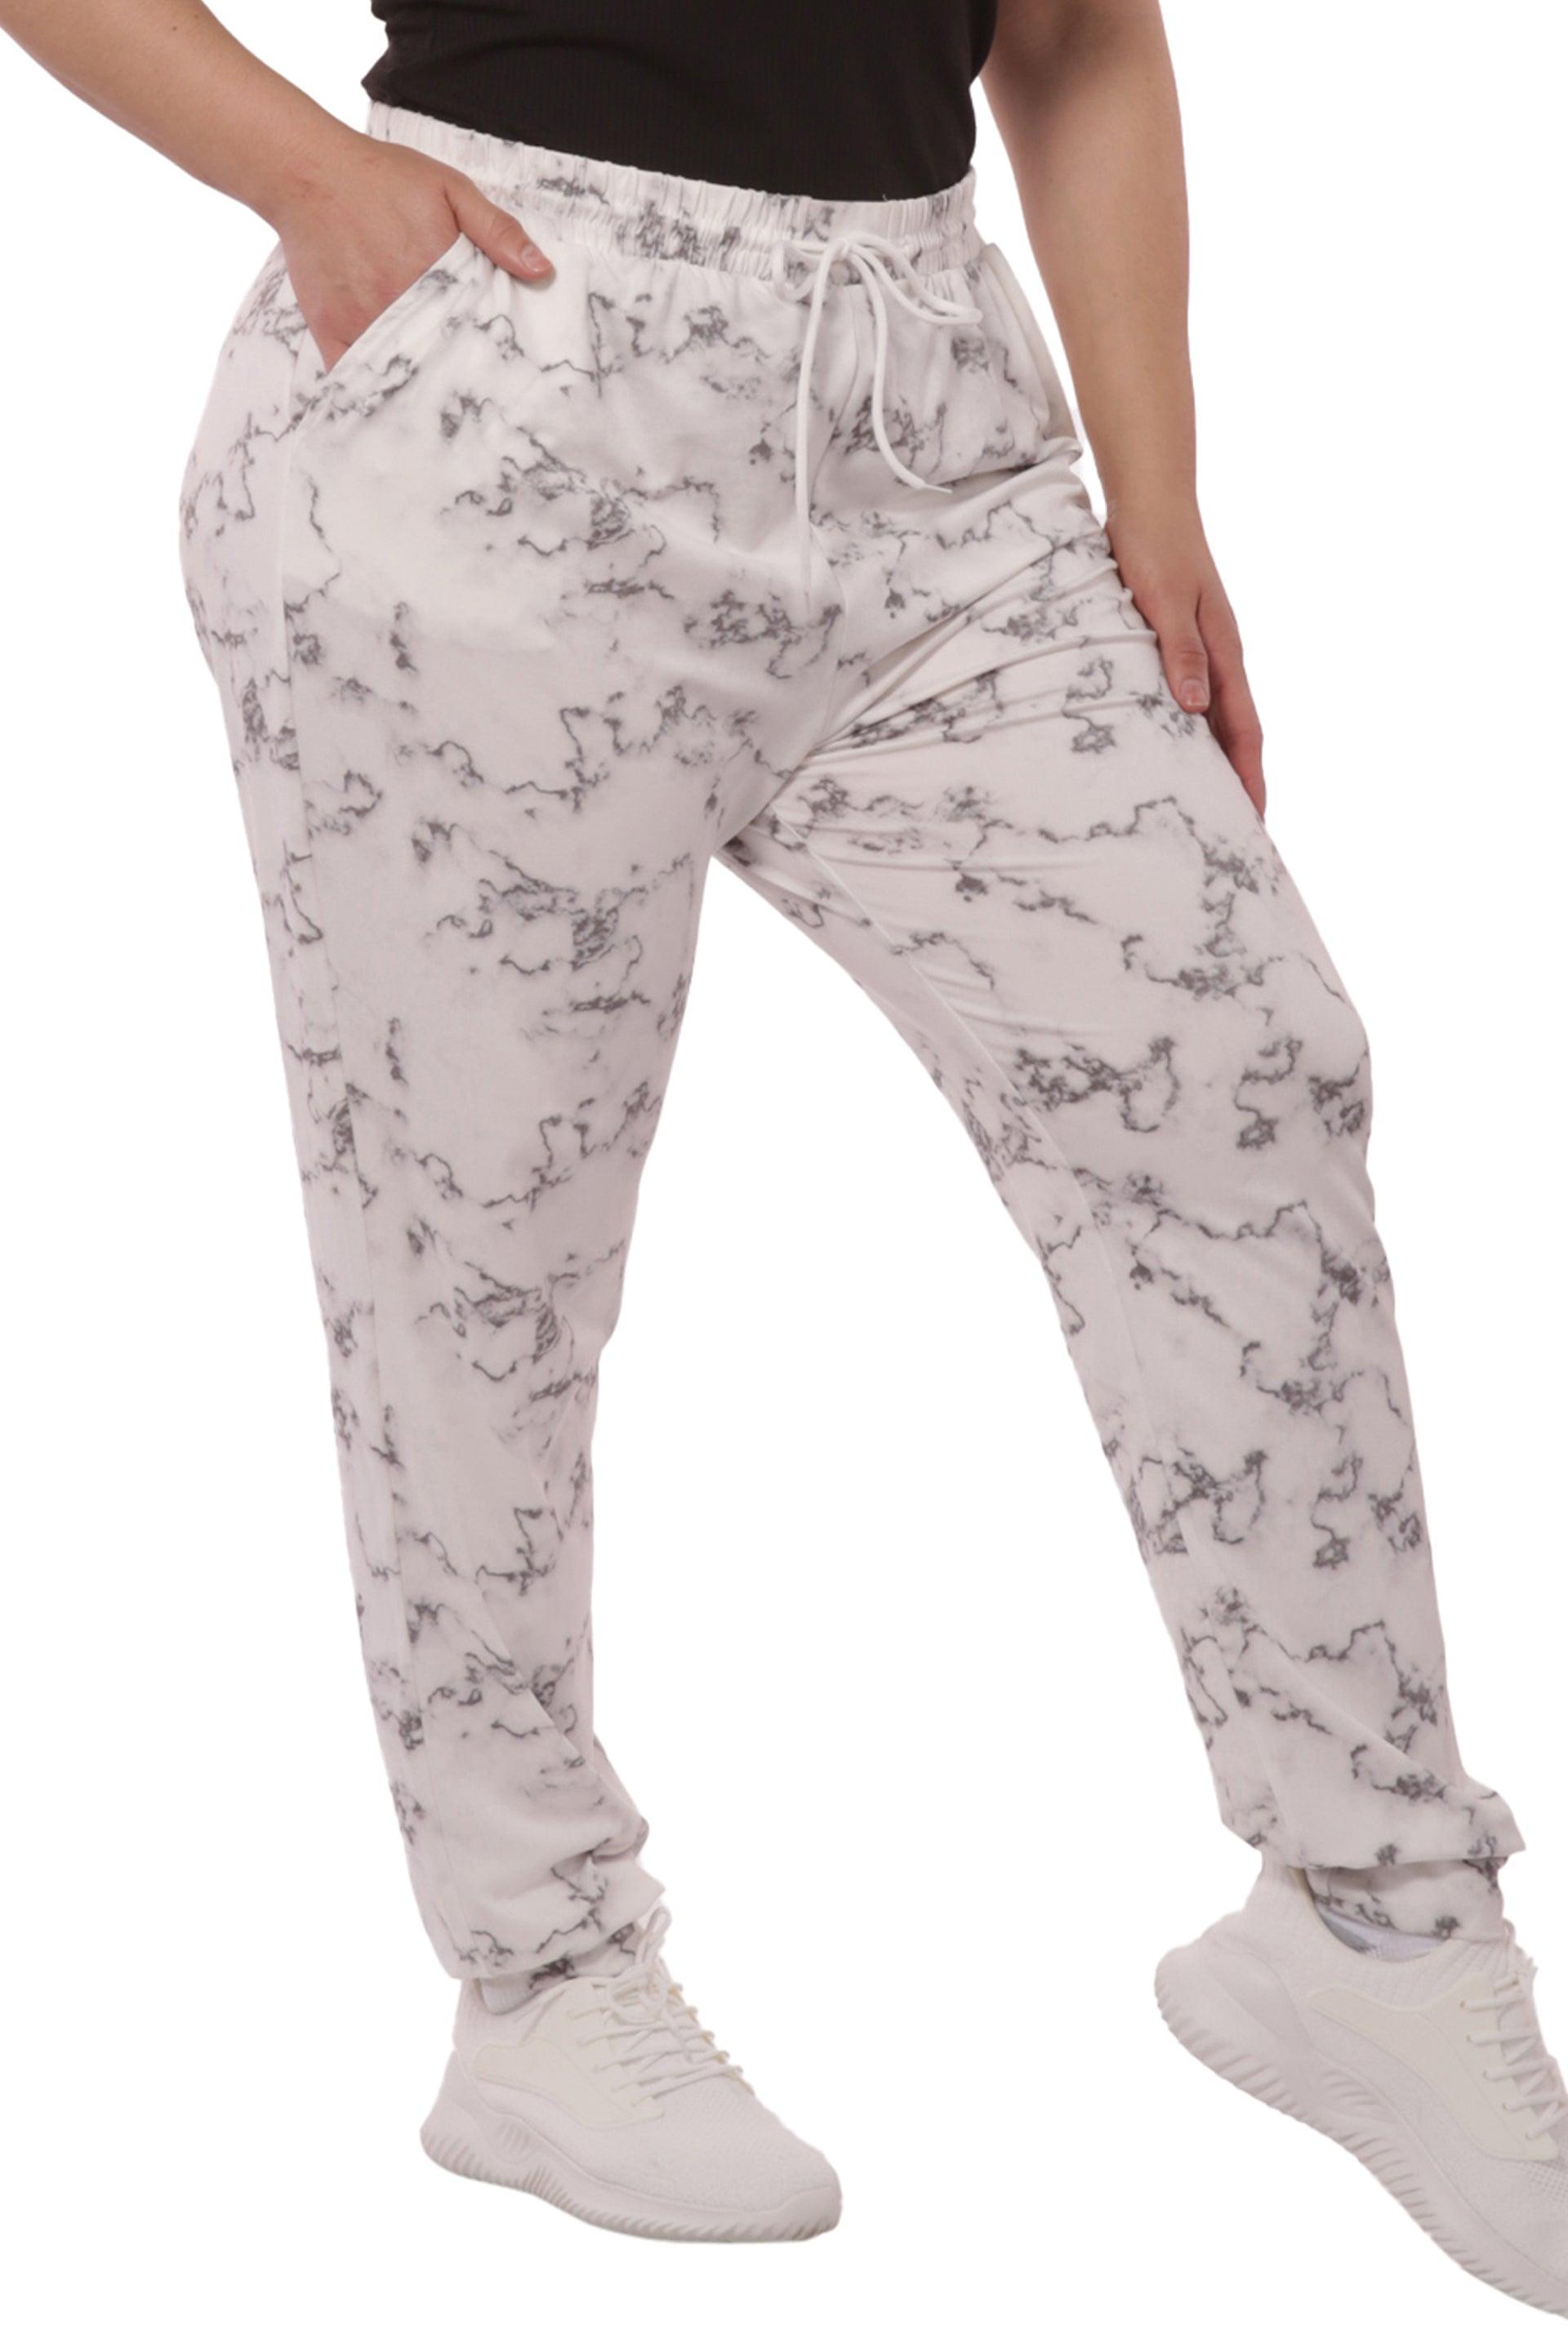 Plus Size Soft Brushed Joggers With Shoe Lace Tie - Grey & White Marble - SHOSHO Fashion